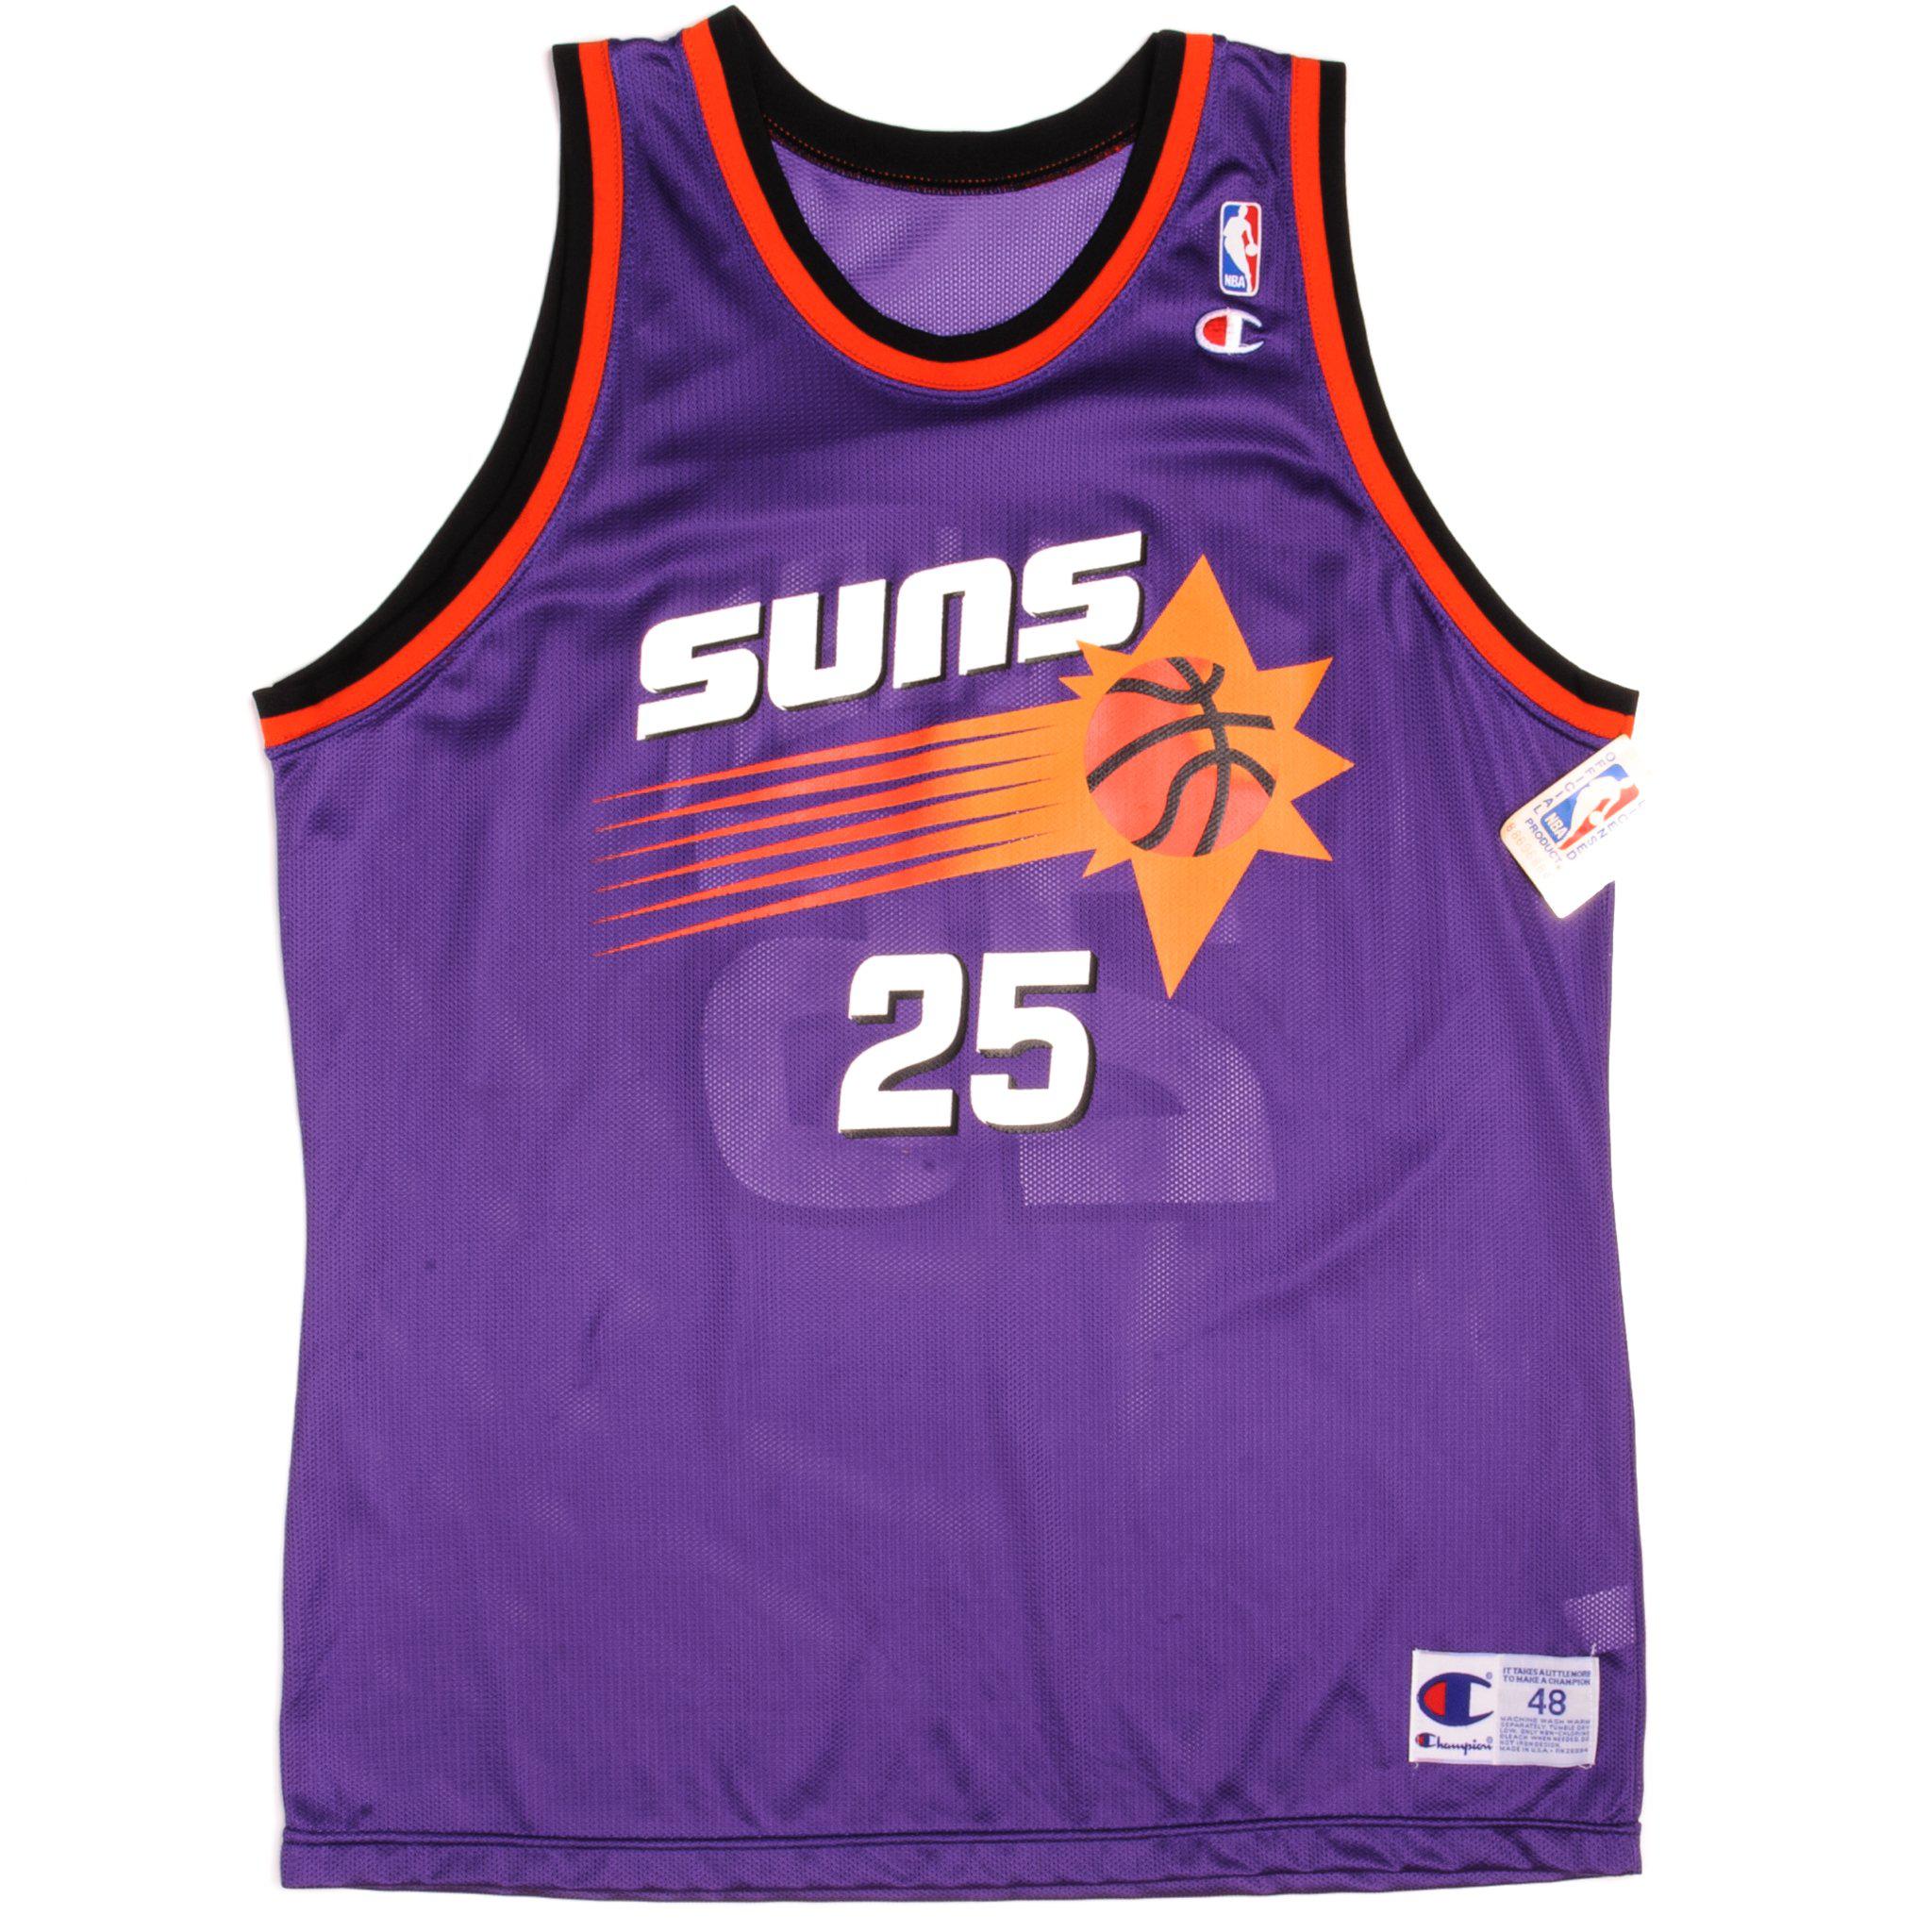 Mid-90s Phoenix Suns jerseys called fourth-best of that decade